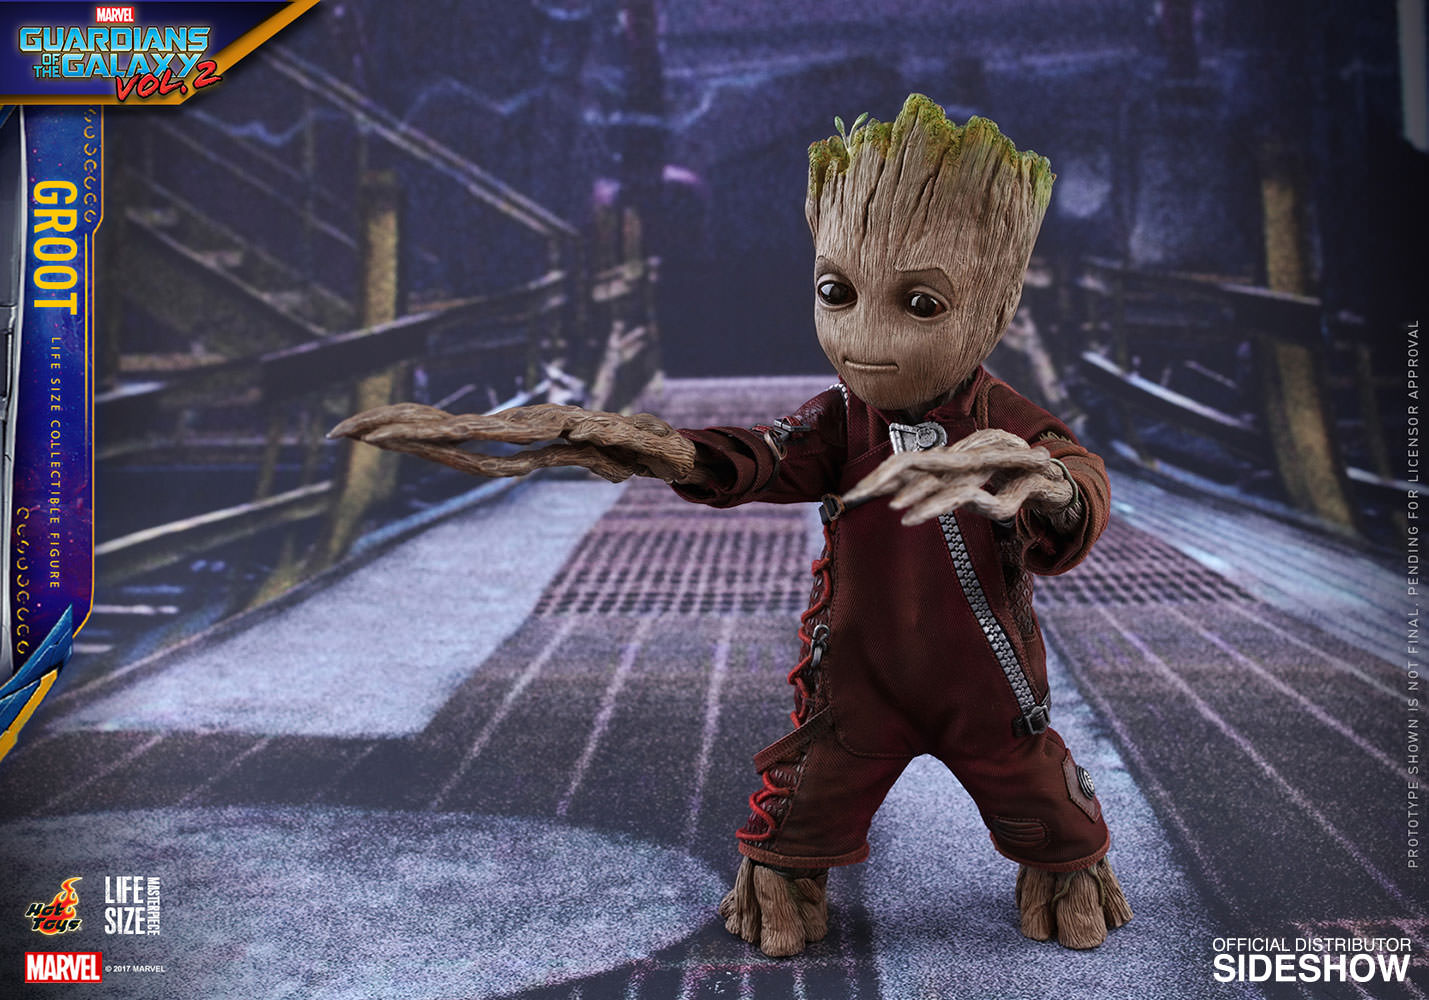 Guardians of the Galaxy Baby Groot Life-Size Figure